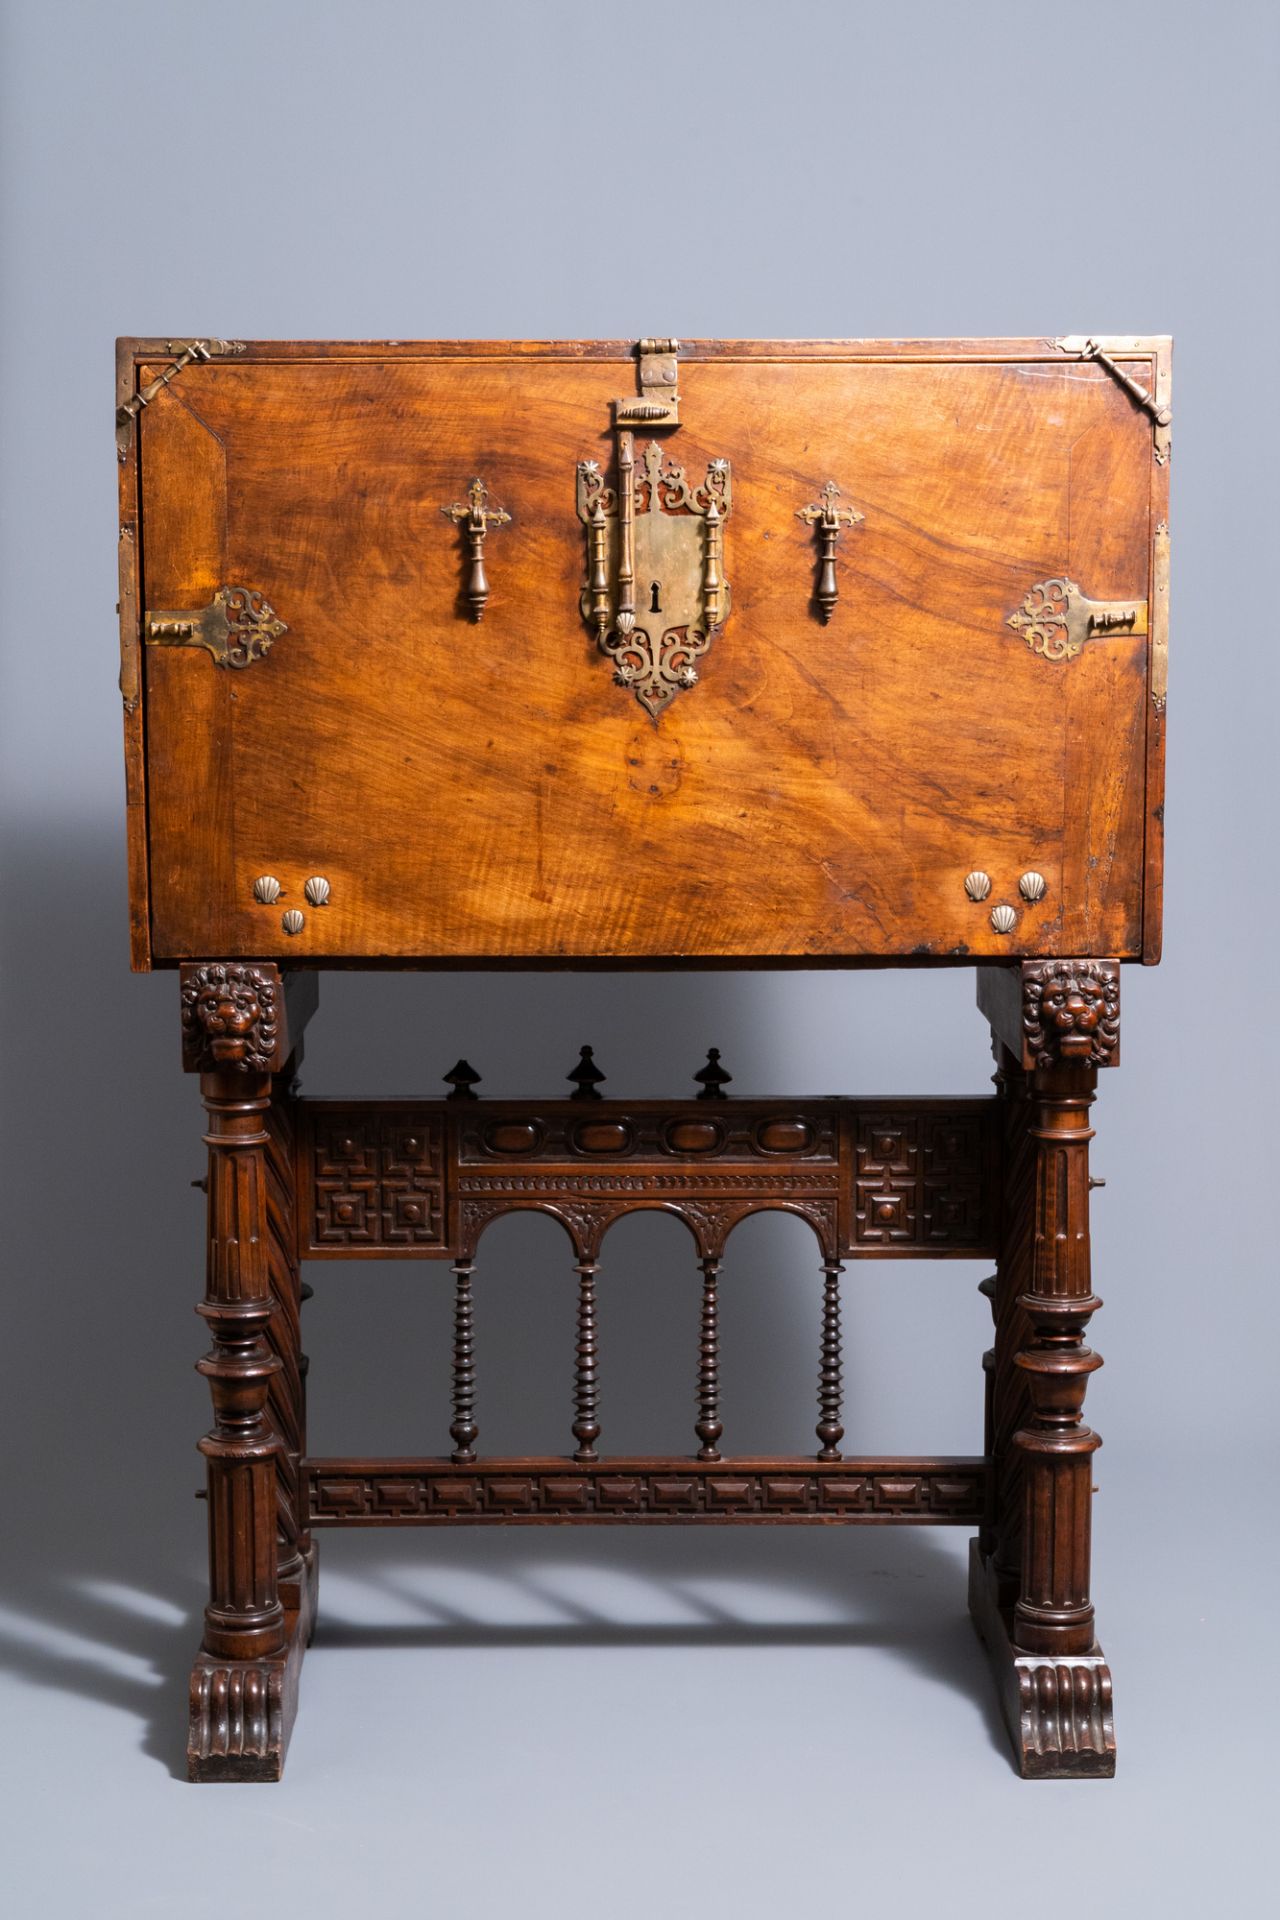 A Spanish bronze-mounted oak 'bargue–o' or cabinet on stand, 16th C. - Image 2 of 16